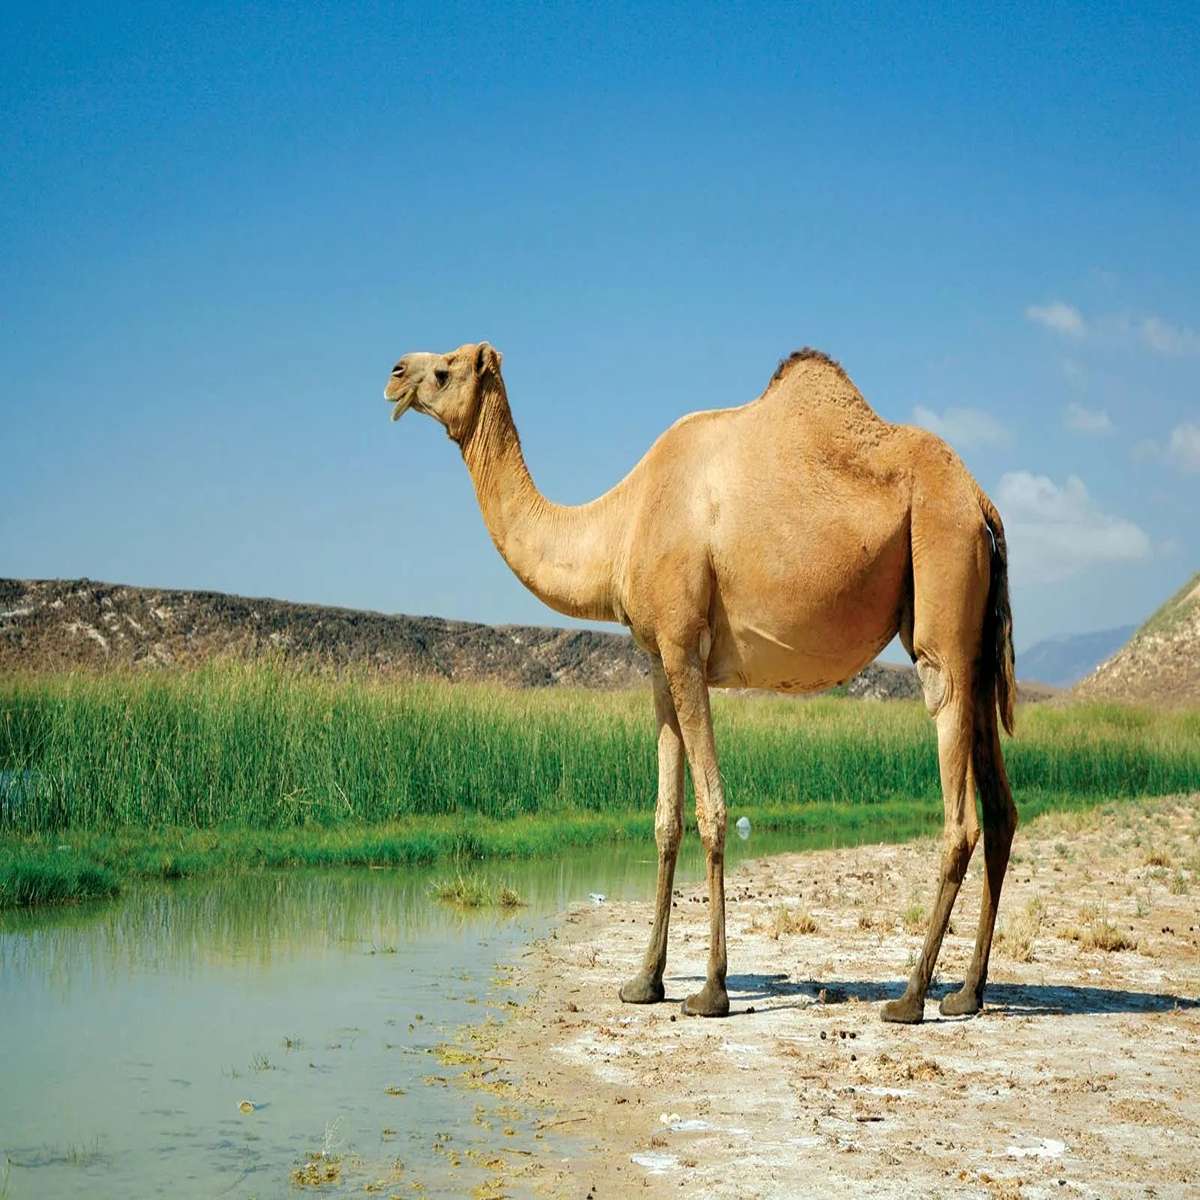 When a camel pees, its urine is as thick as maple syrup.